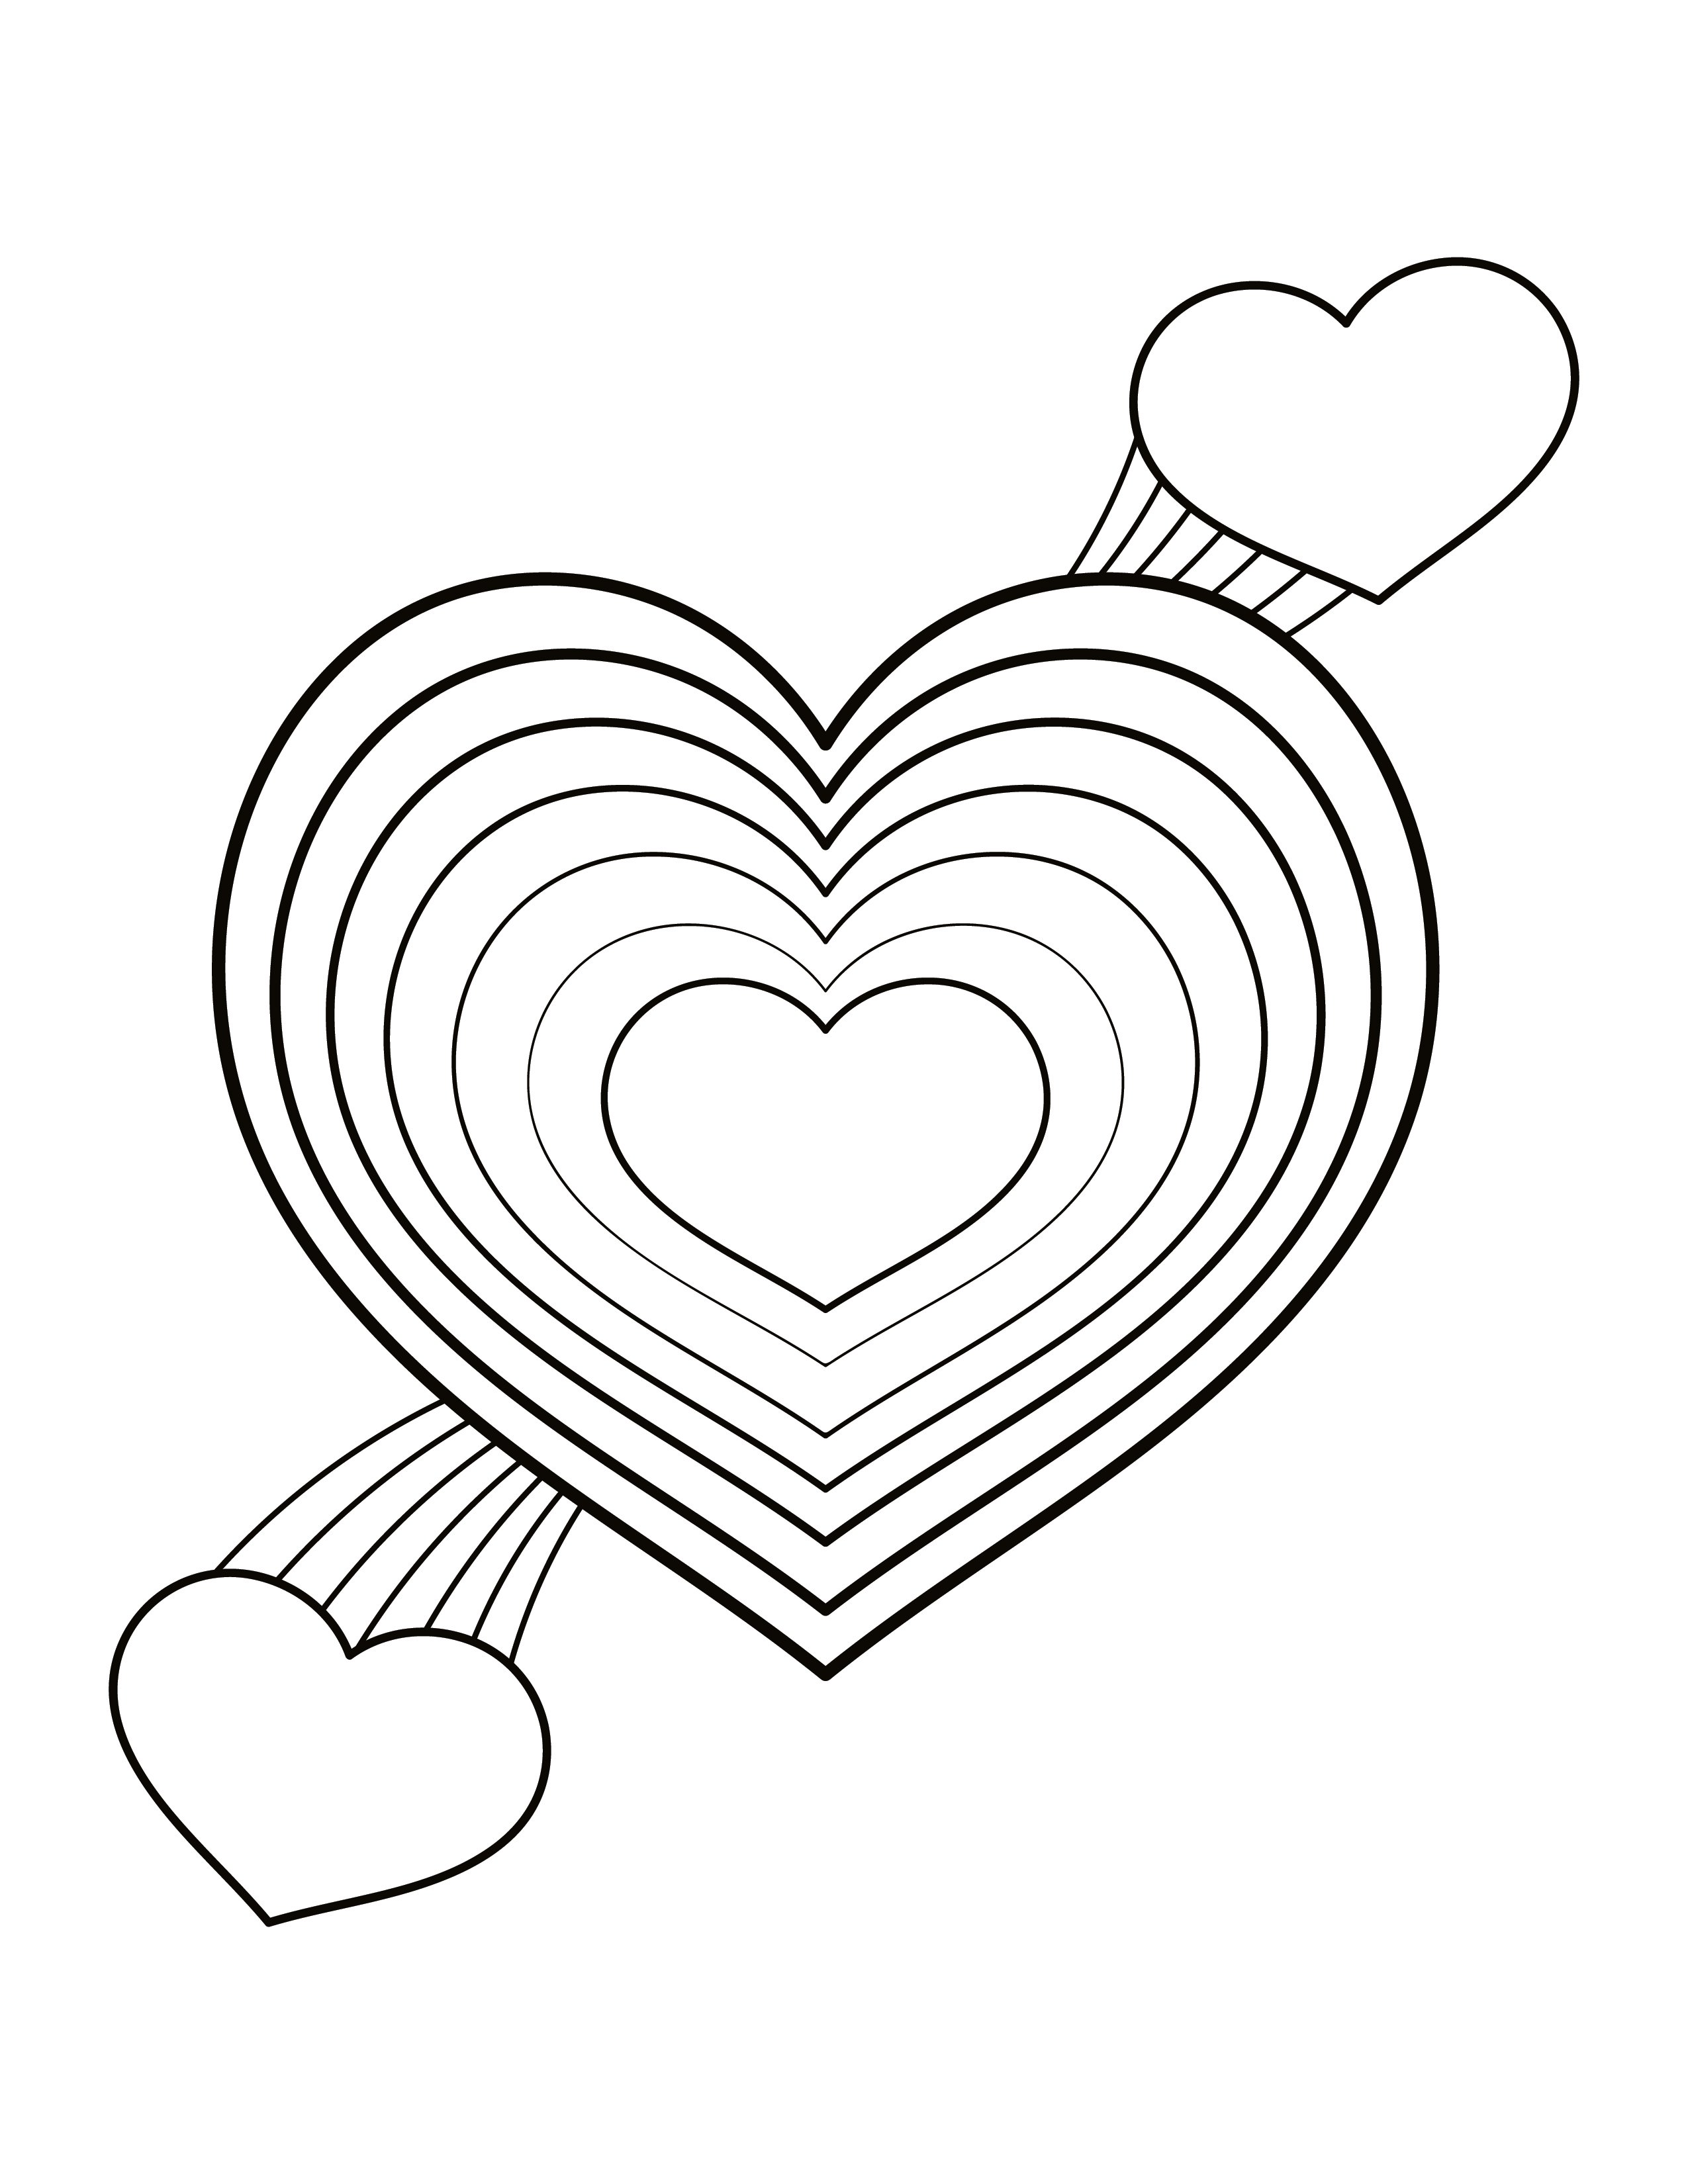 Rainbow With Hearts Coloring Page